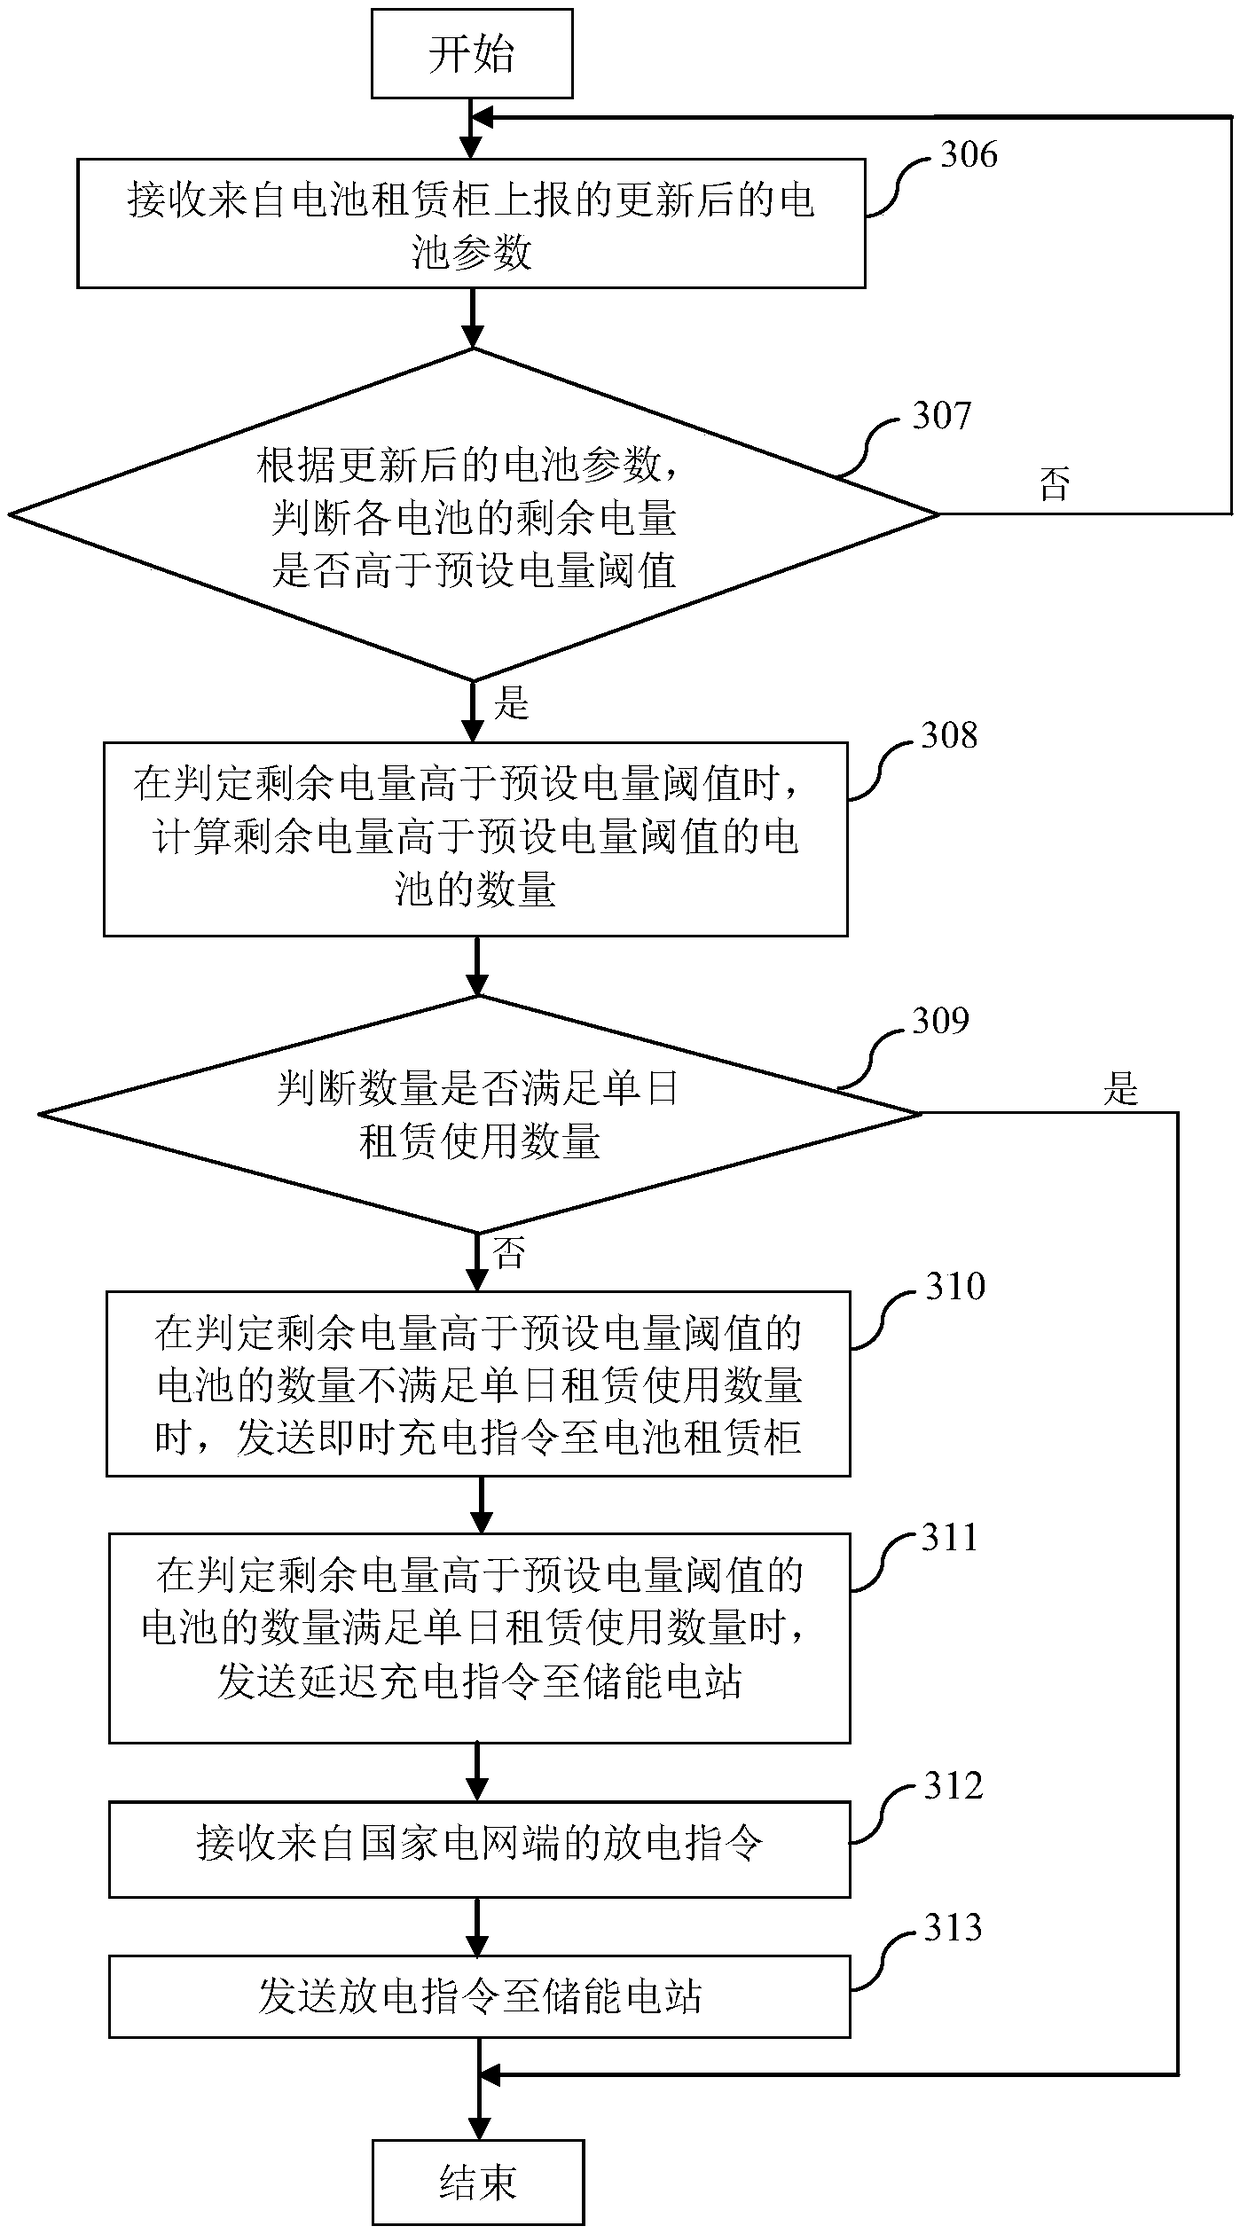 Battery-sharing service method, system and cloud server based on electric vehicle